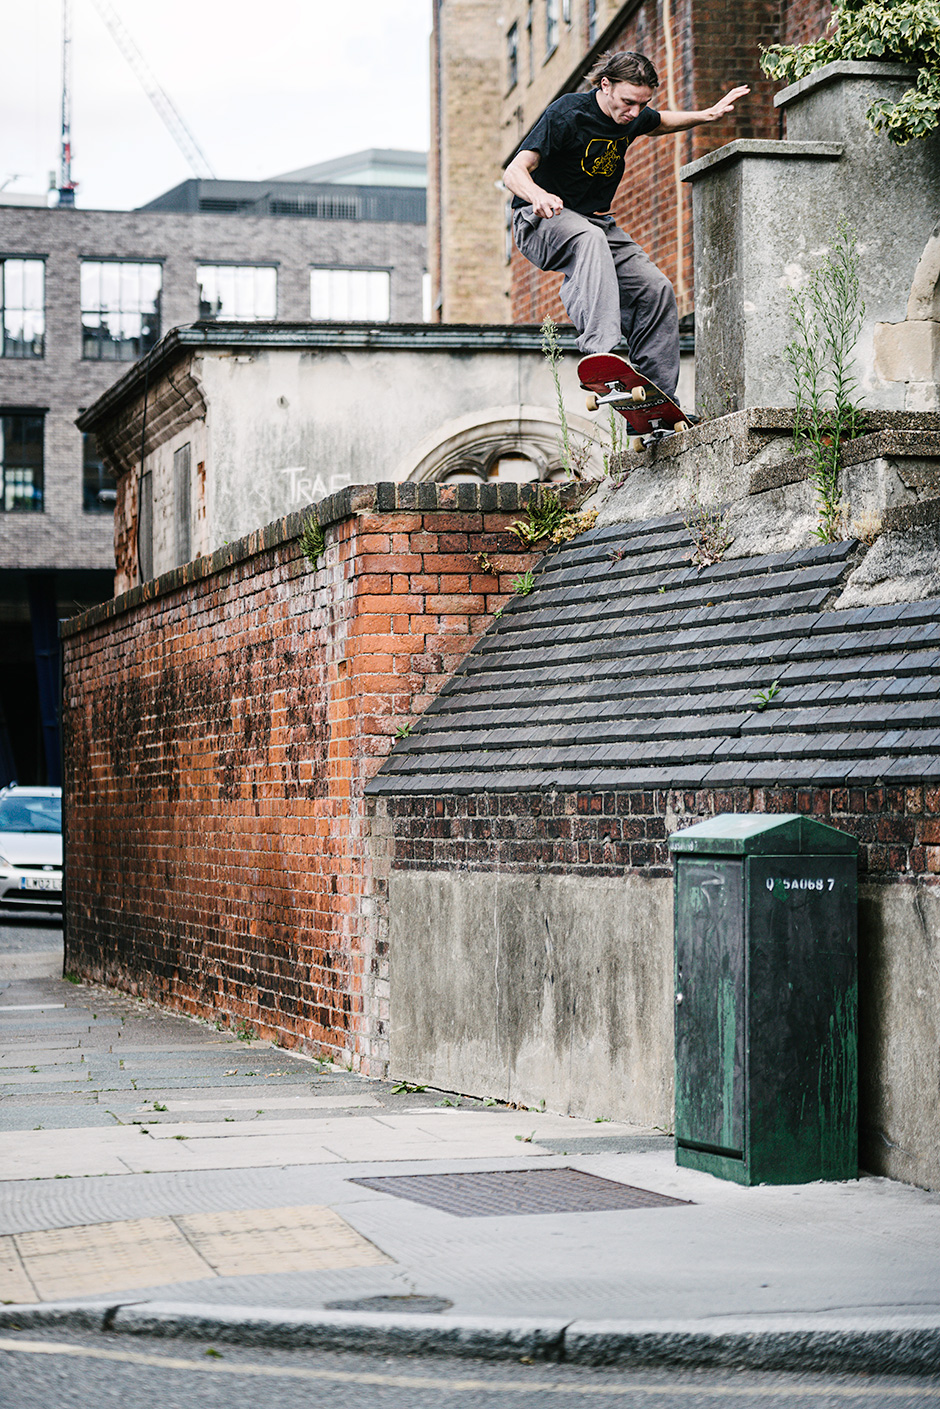 Zach Riley take a precarious 5-0 grind and prepares for the plunge. Rich West shoots